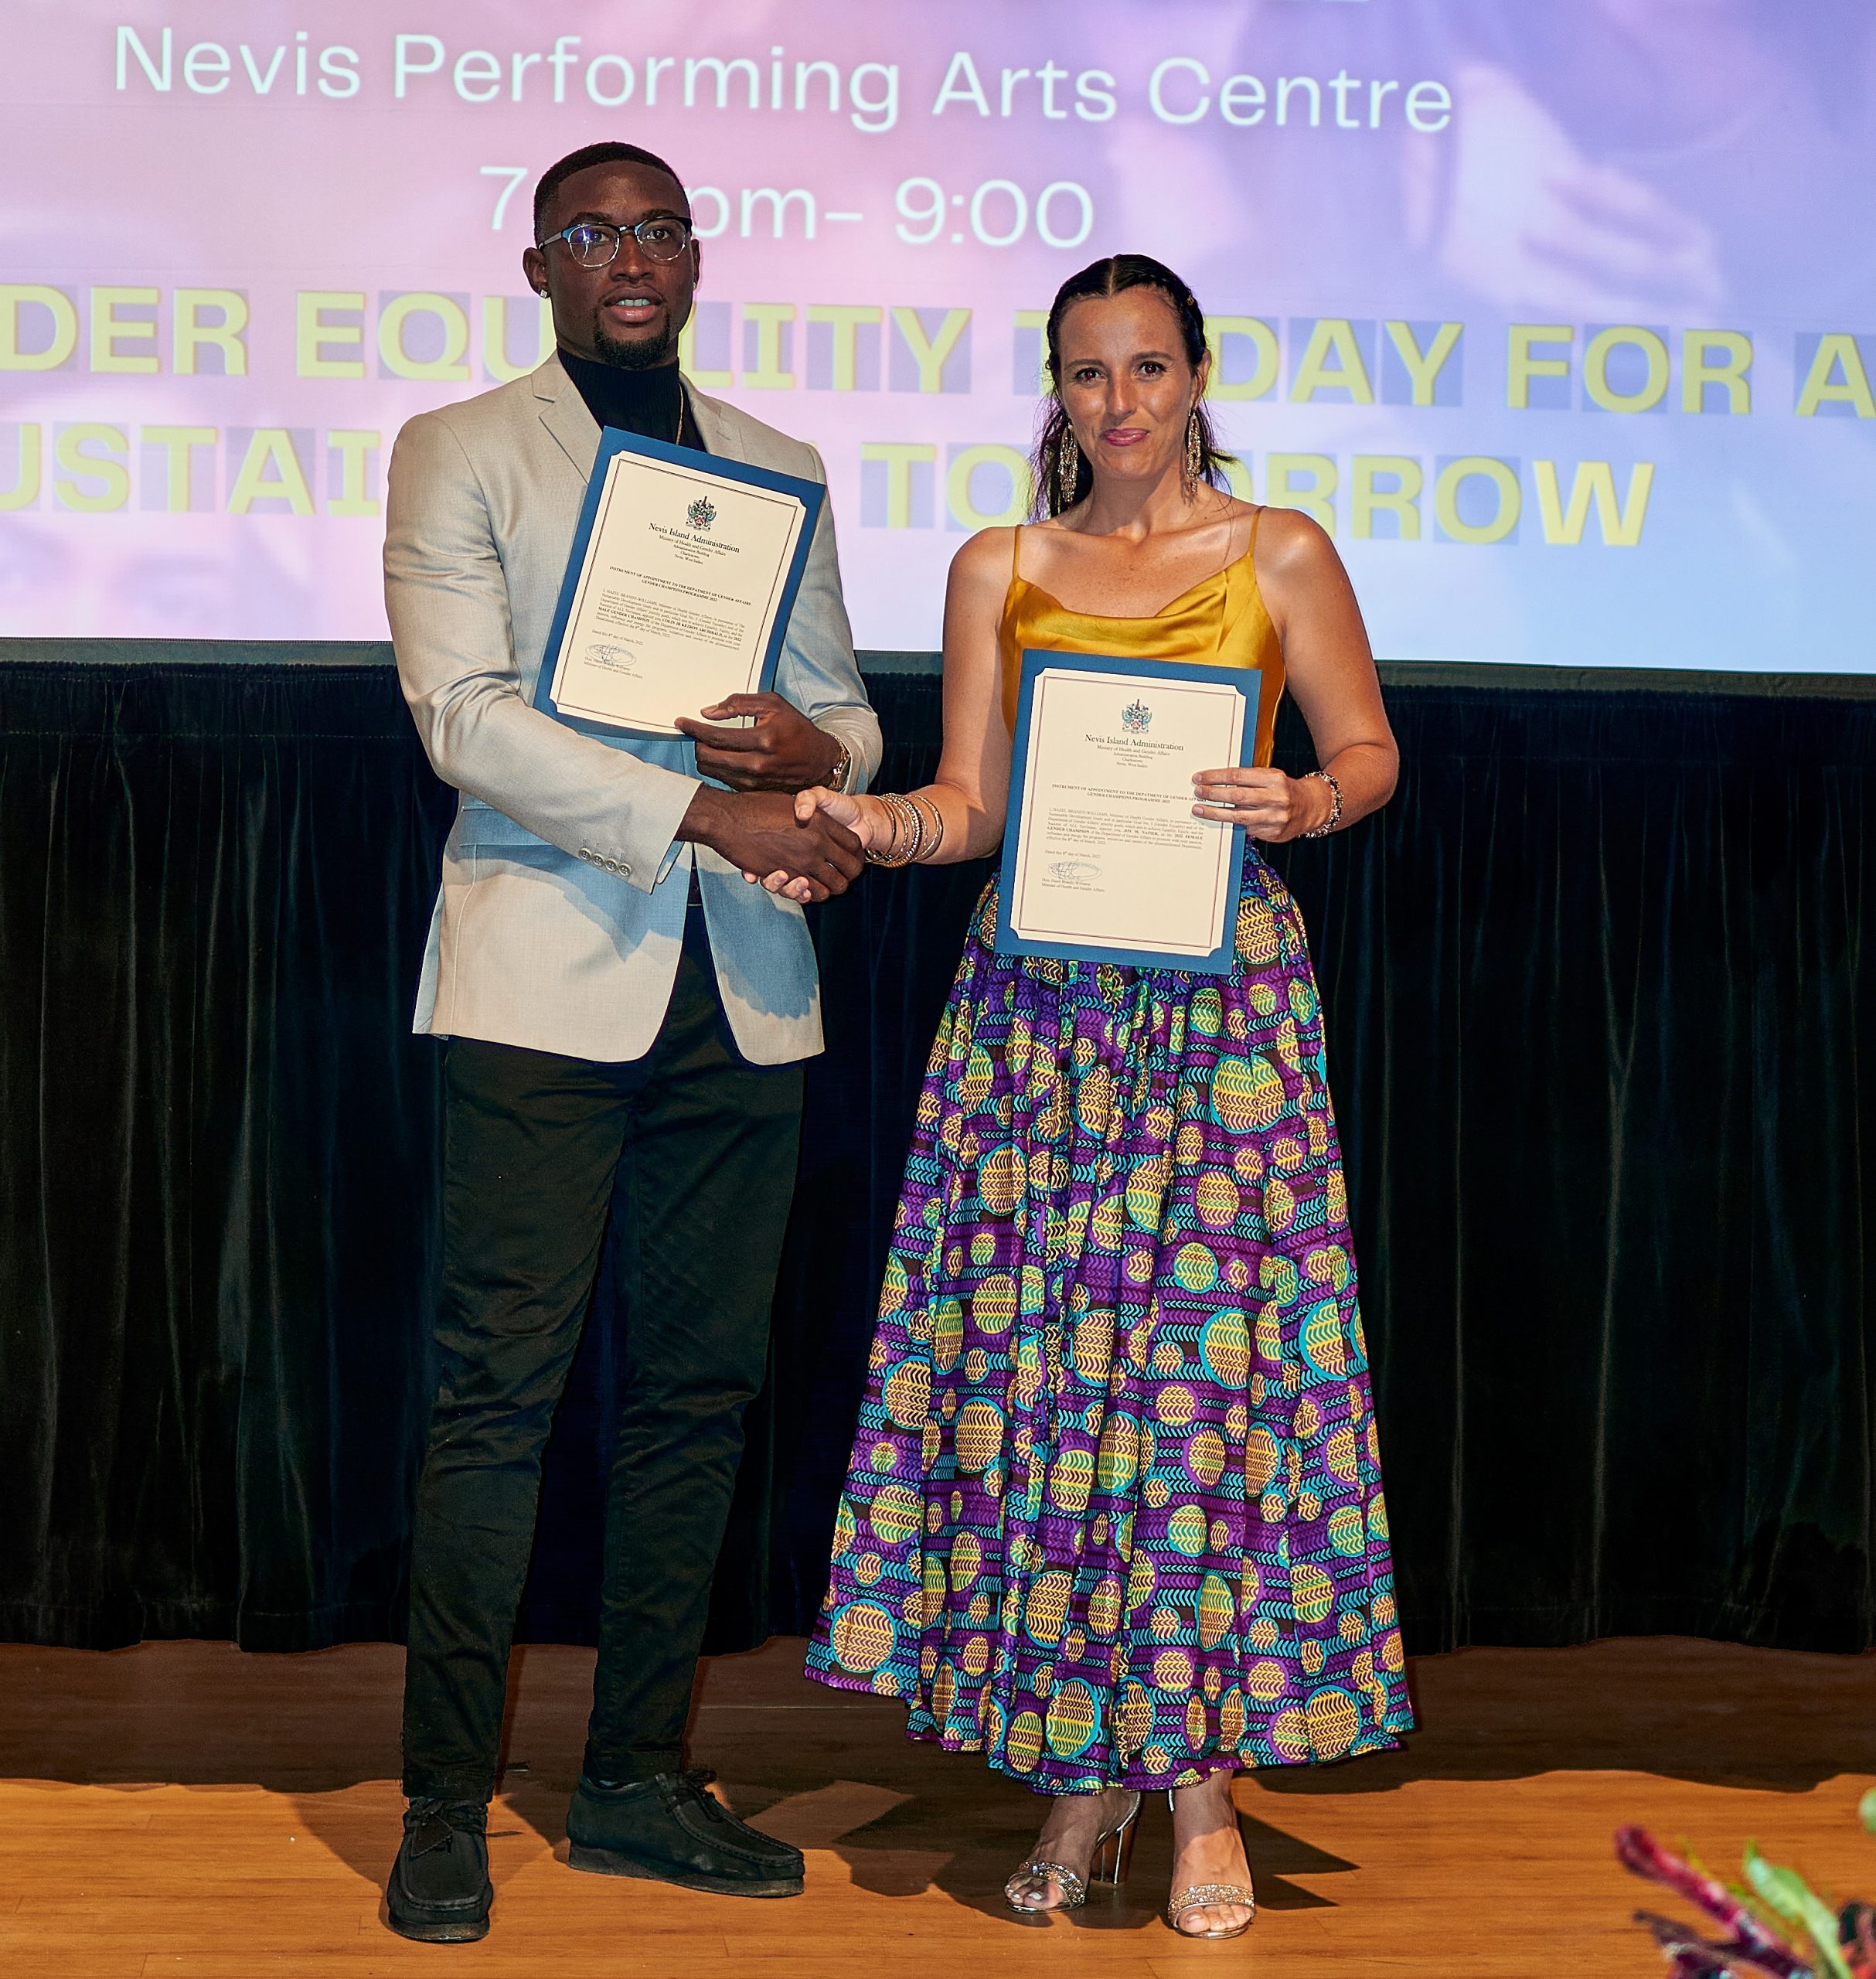 (l-r) Mr. Colin Kezron Archibald and Ms. Joy Napier, the first gender champions in the Department of Gender Affairs’ Gender Champions Programme, showing off their Instruments of Appointment at the Ministry of Health and Gender Affairs’ International Women’s Day Awards Ceremony at the Nevis Performing Arts Centre on March 08, 2022